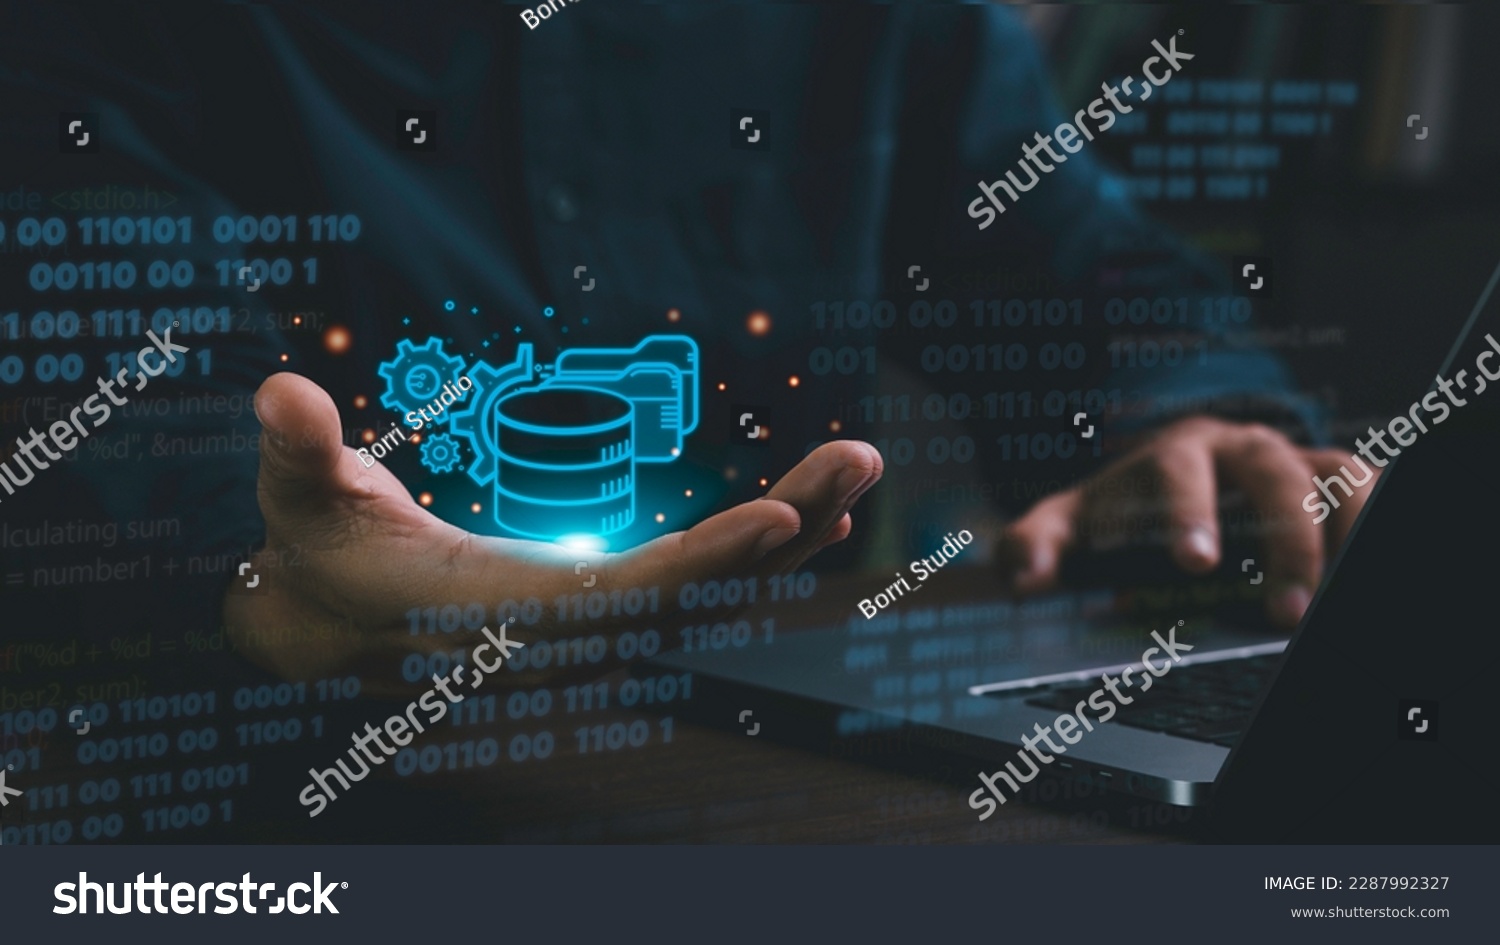 User can check data storage from SQL (Structured Query Language) database on computer screen with database and server room background. #2287992327